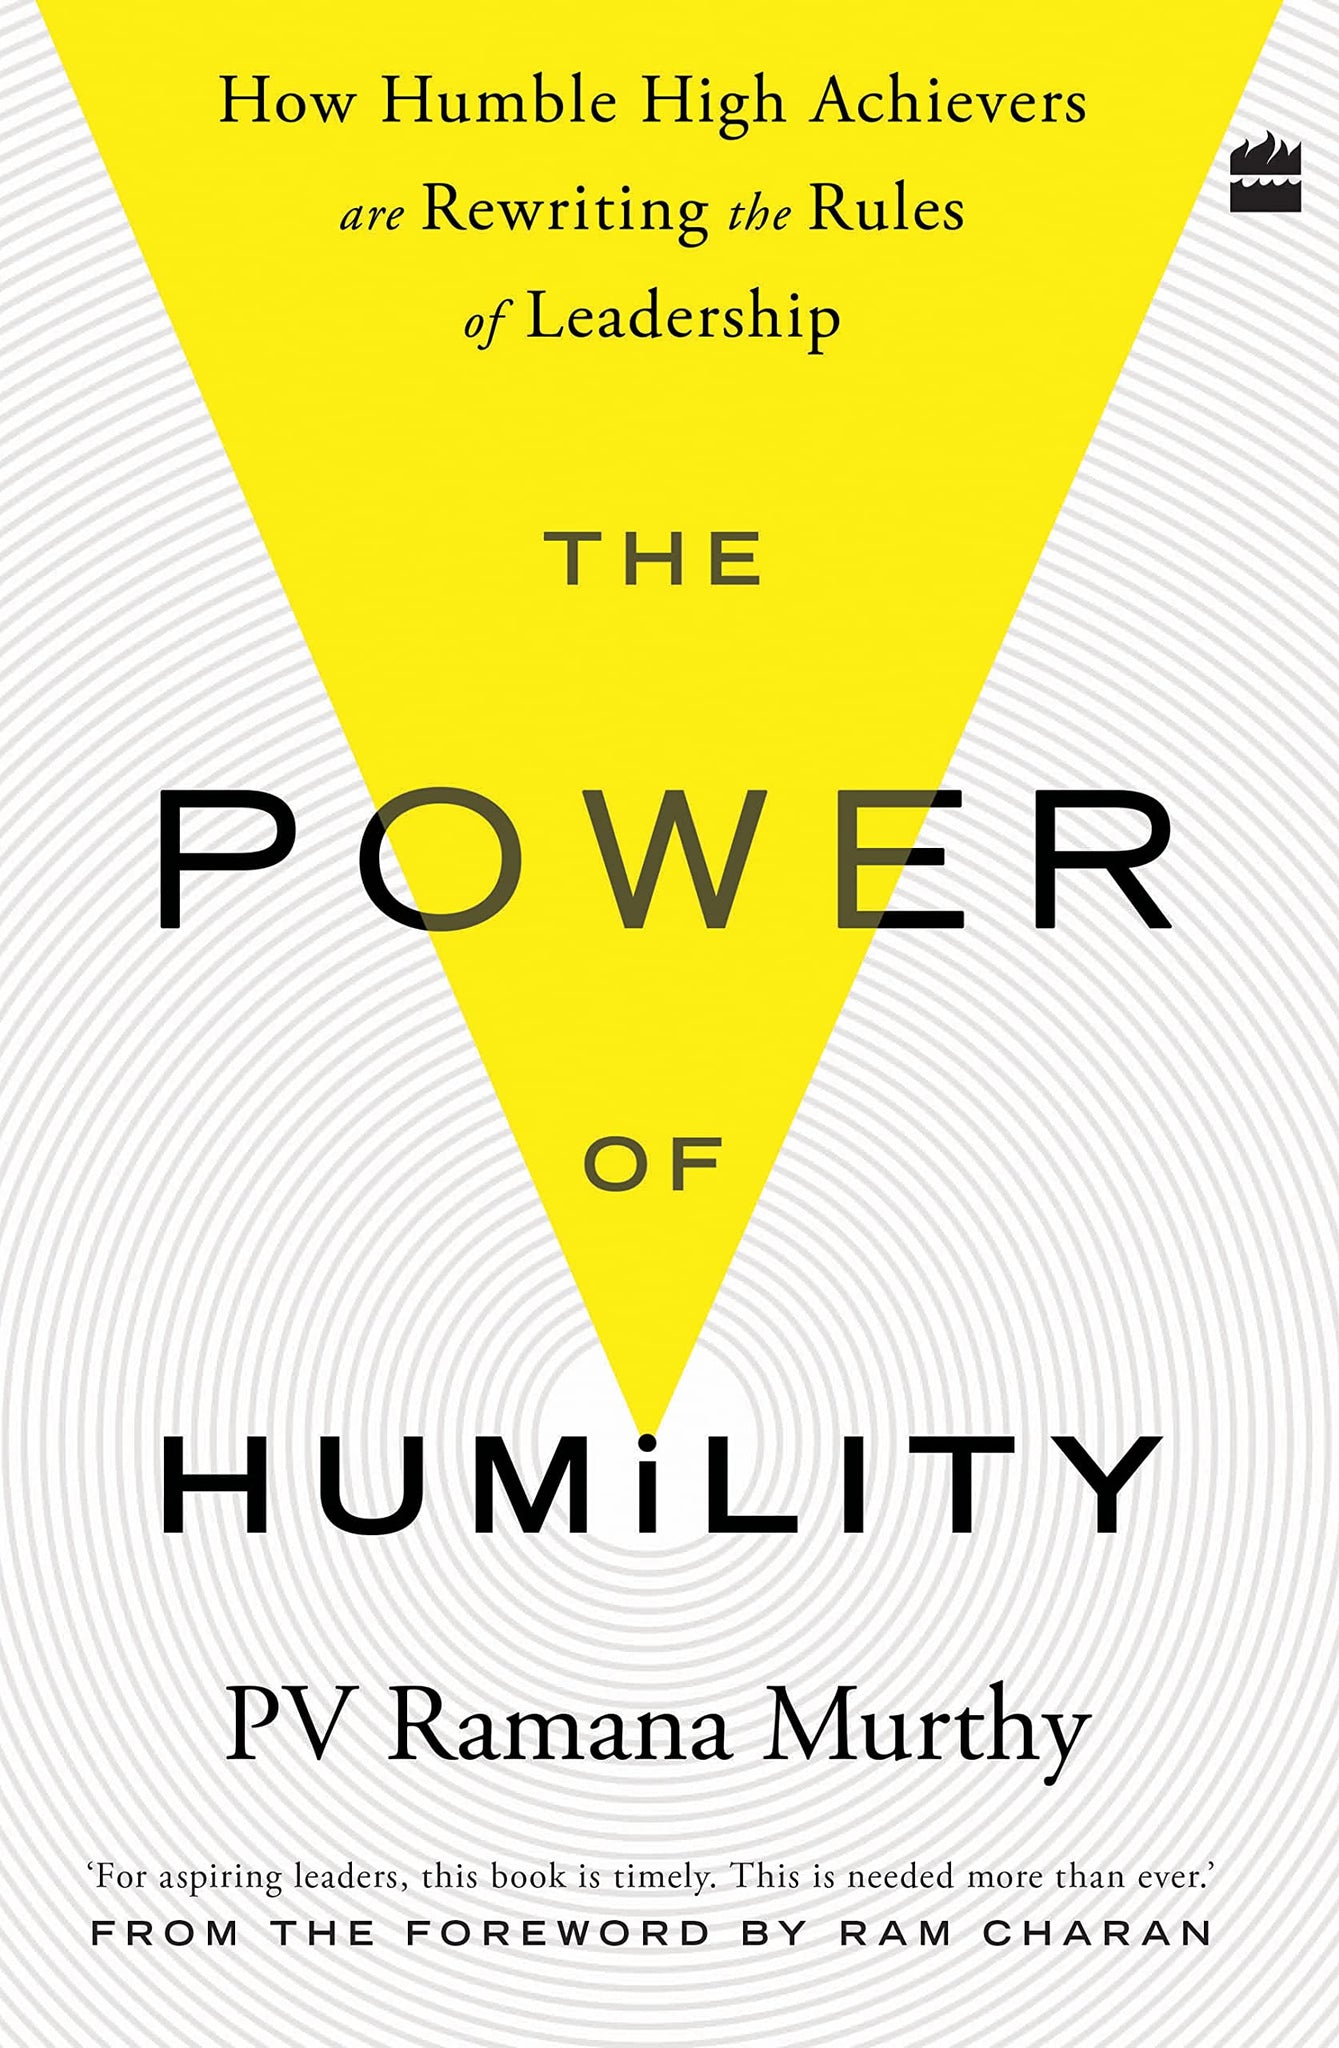 The Power Of Humility: How Humble High Achievers Are Rewriting the Rules of Leadership